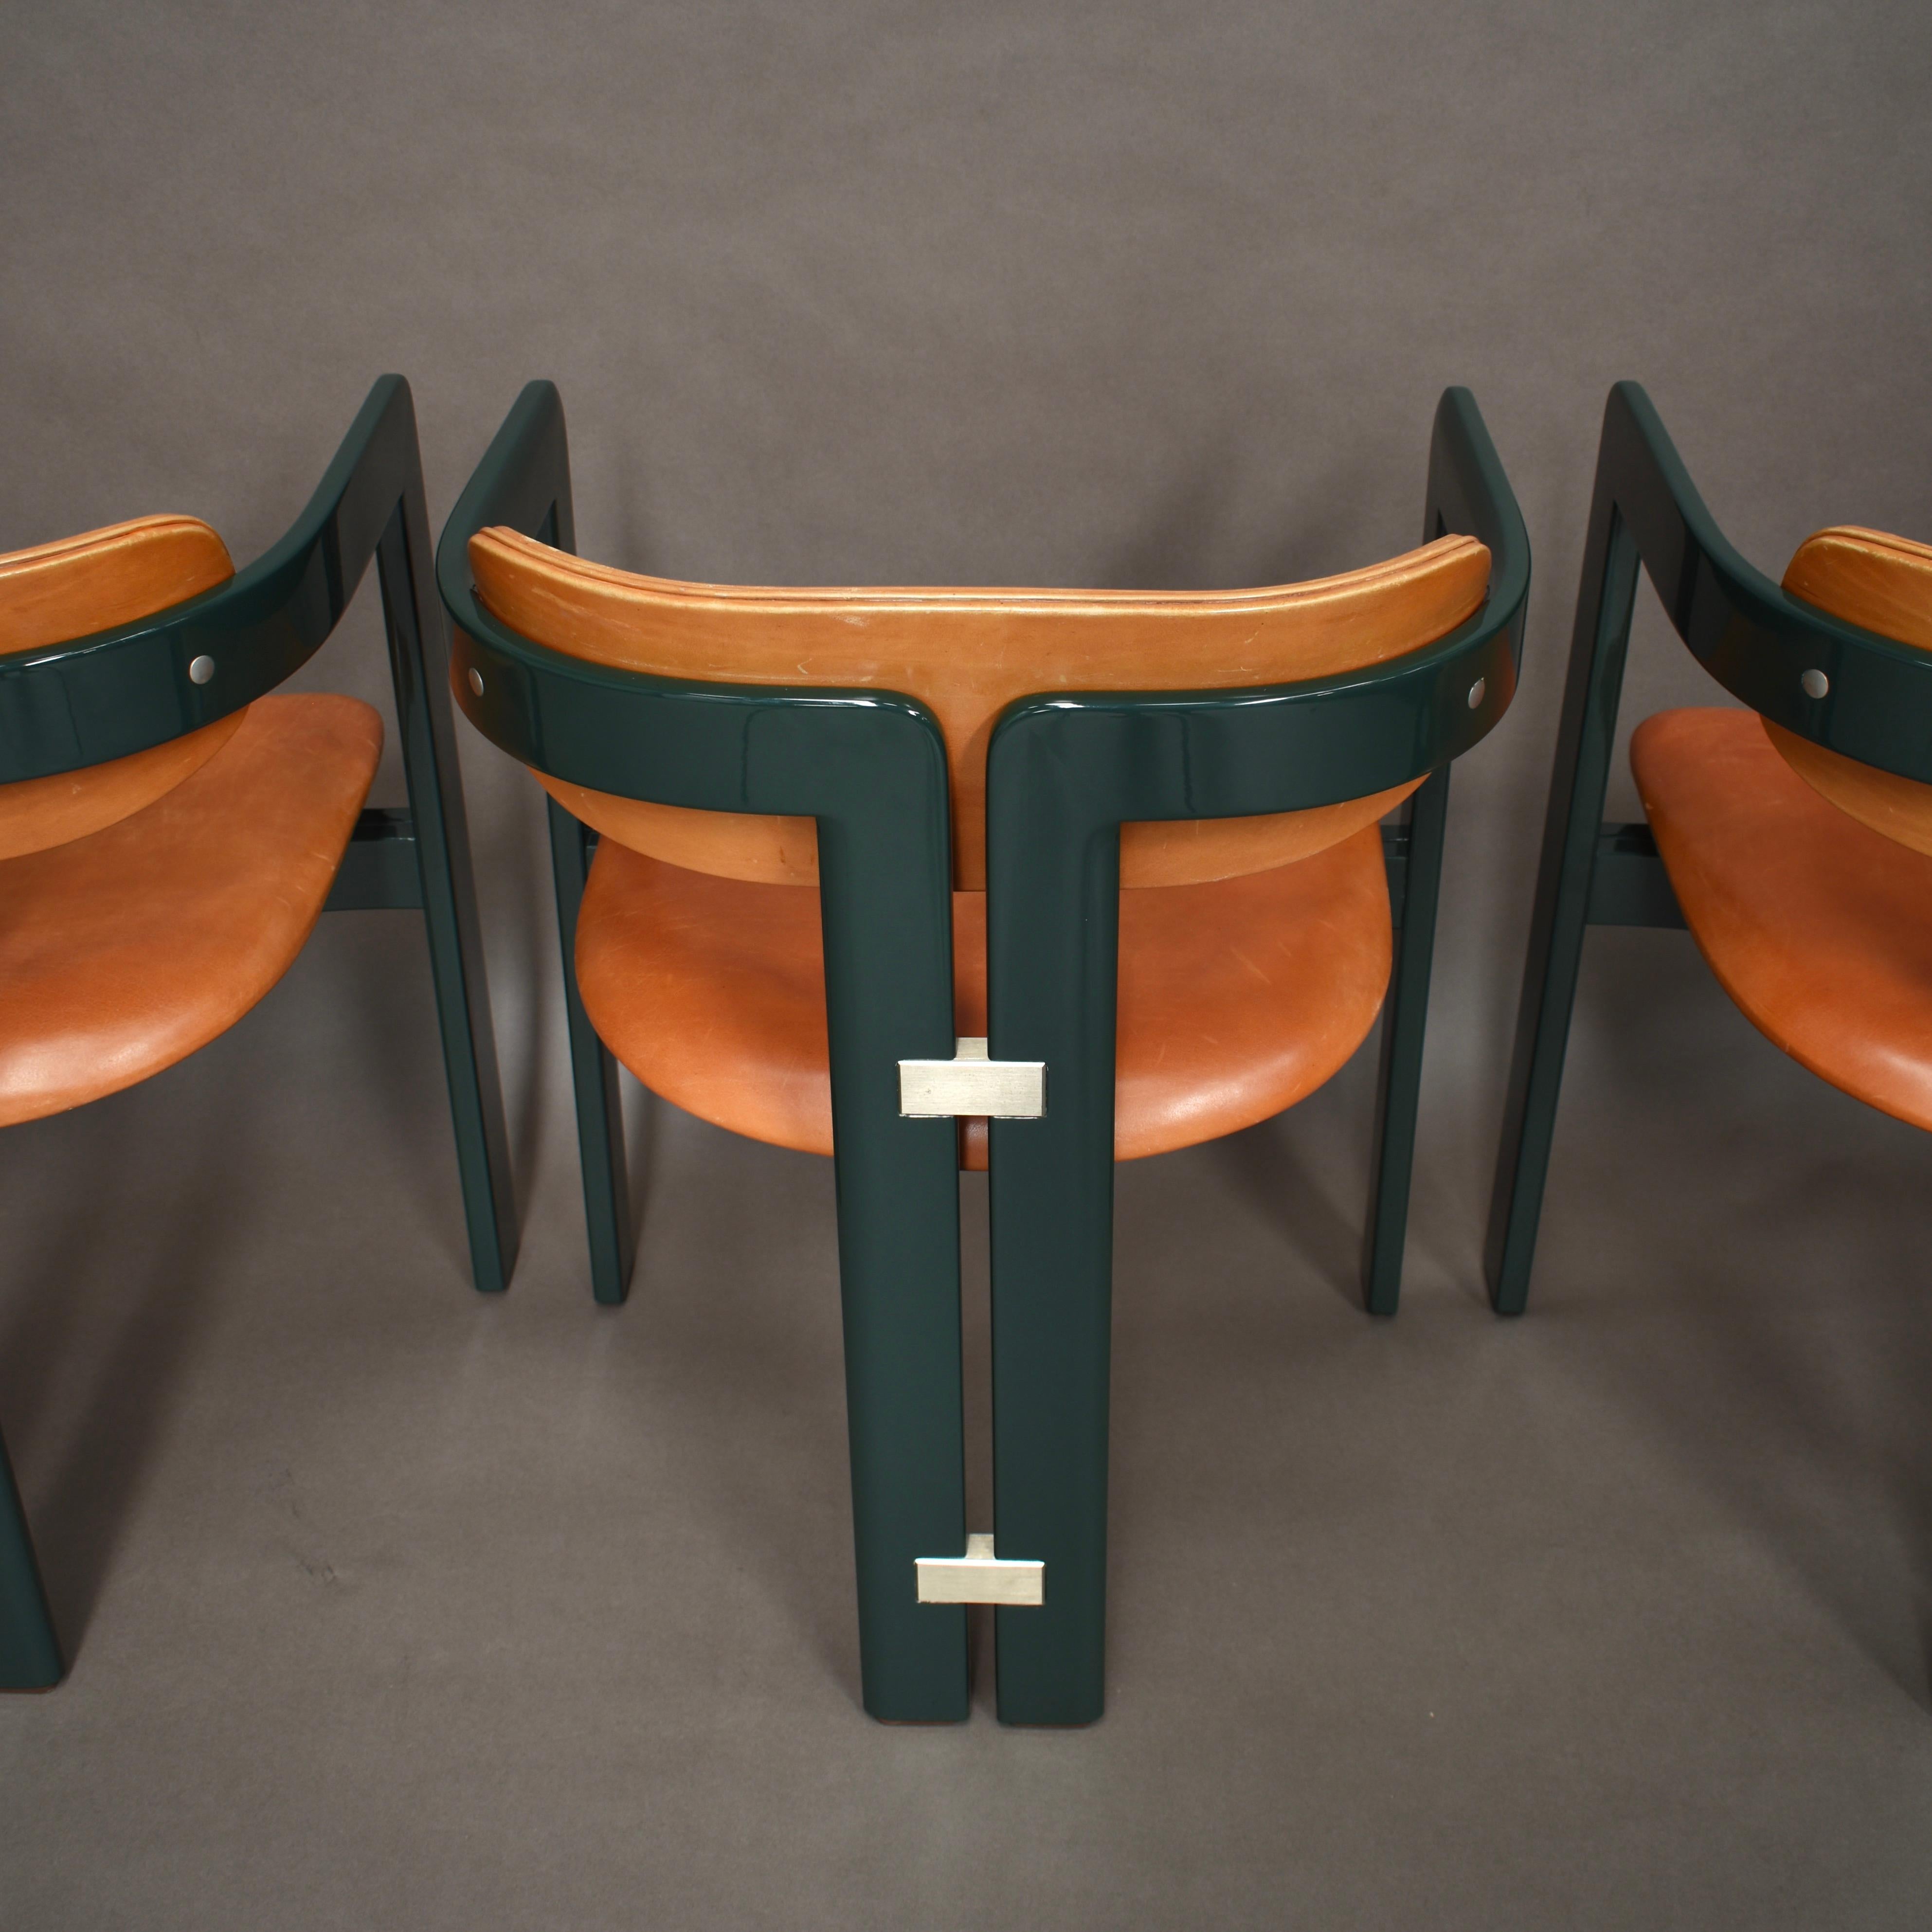 Pamplona Chairs by Augusti Savini in Green and Tan Leather, Italy, 1965 9